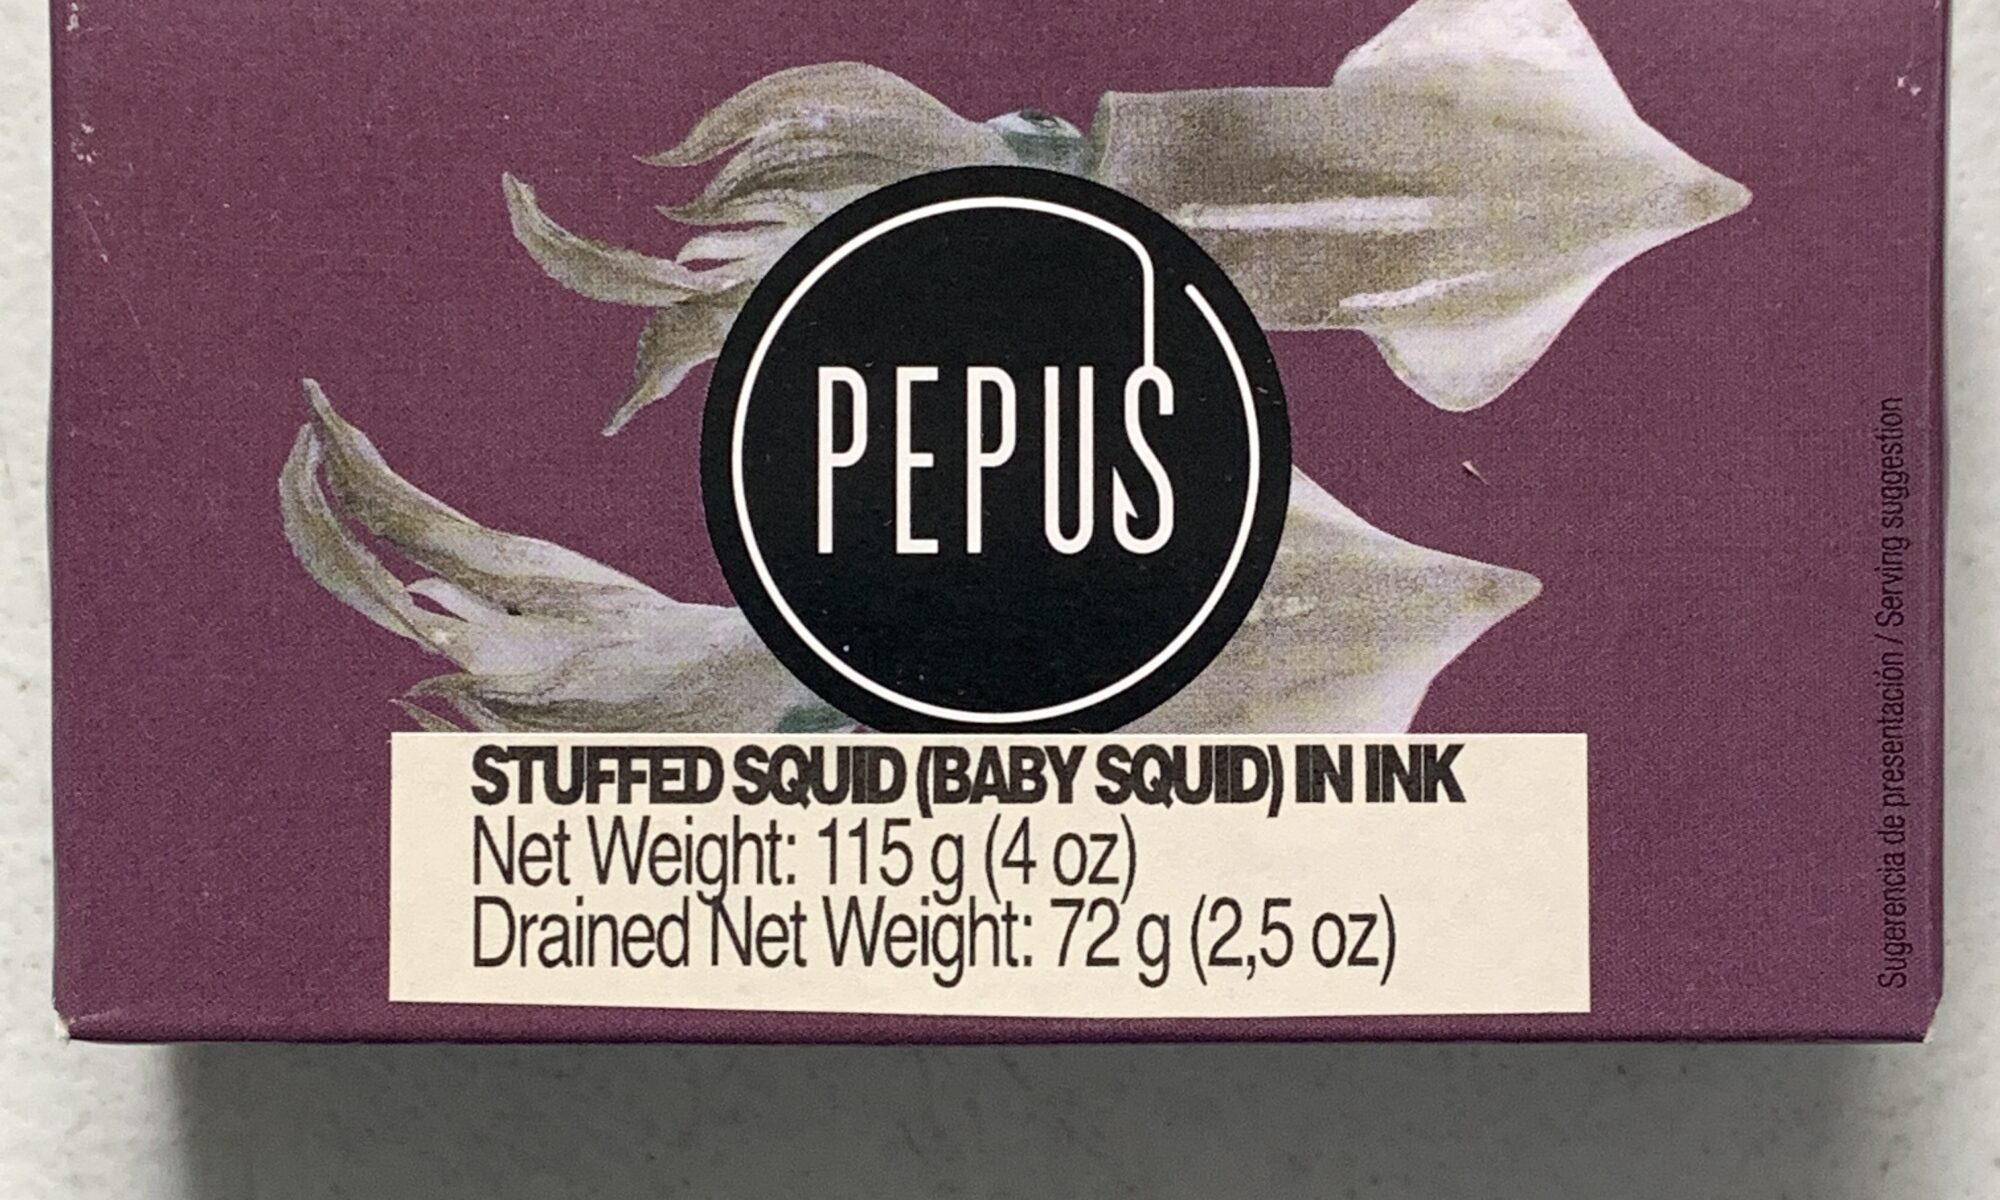 Image of the front of a package of Pepus Stuffed Baby Squid in Ink